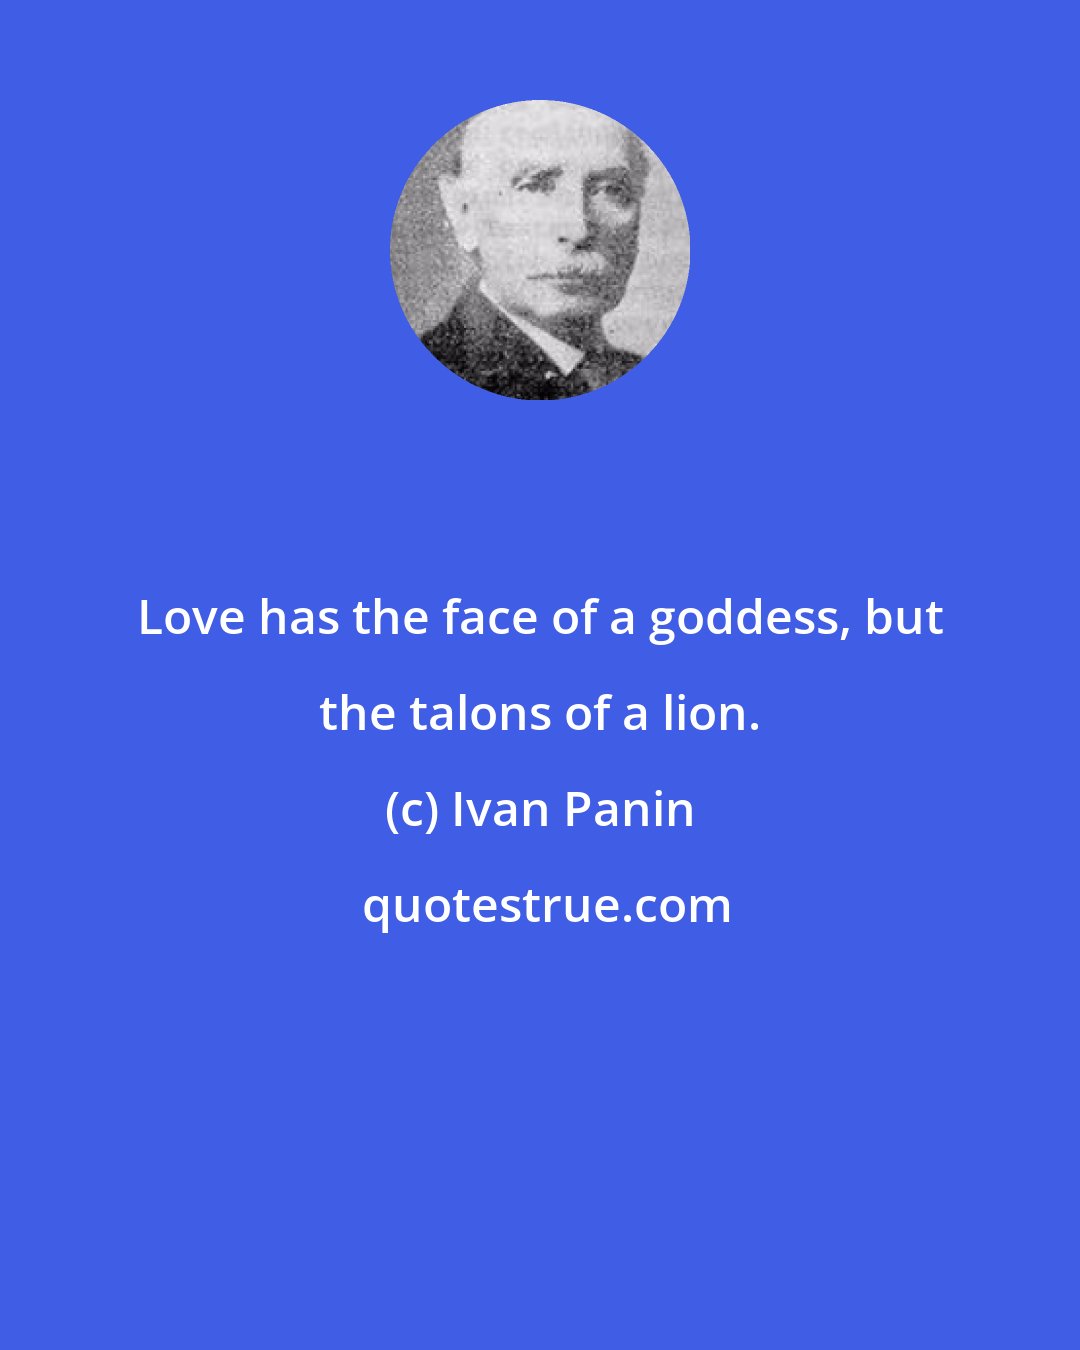 Ivan Panin: Love has the face of a goddess, but the talons of a lion.